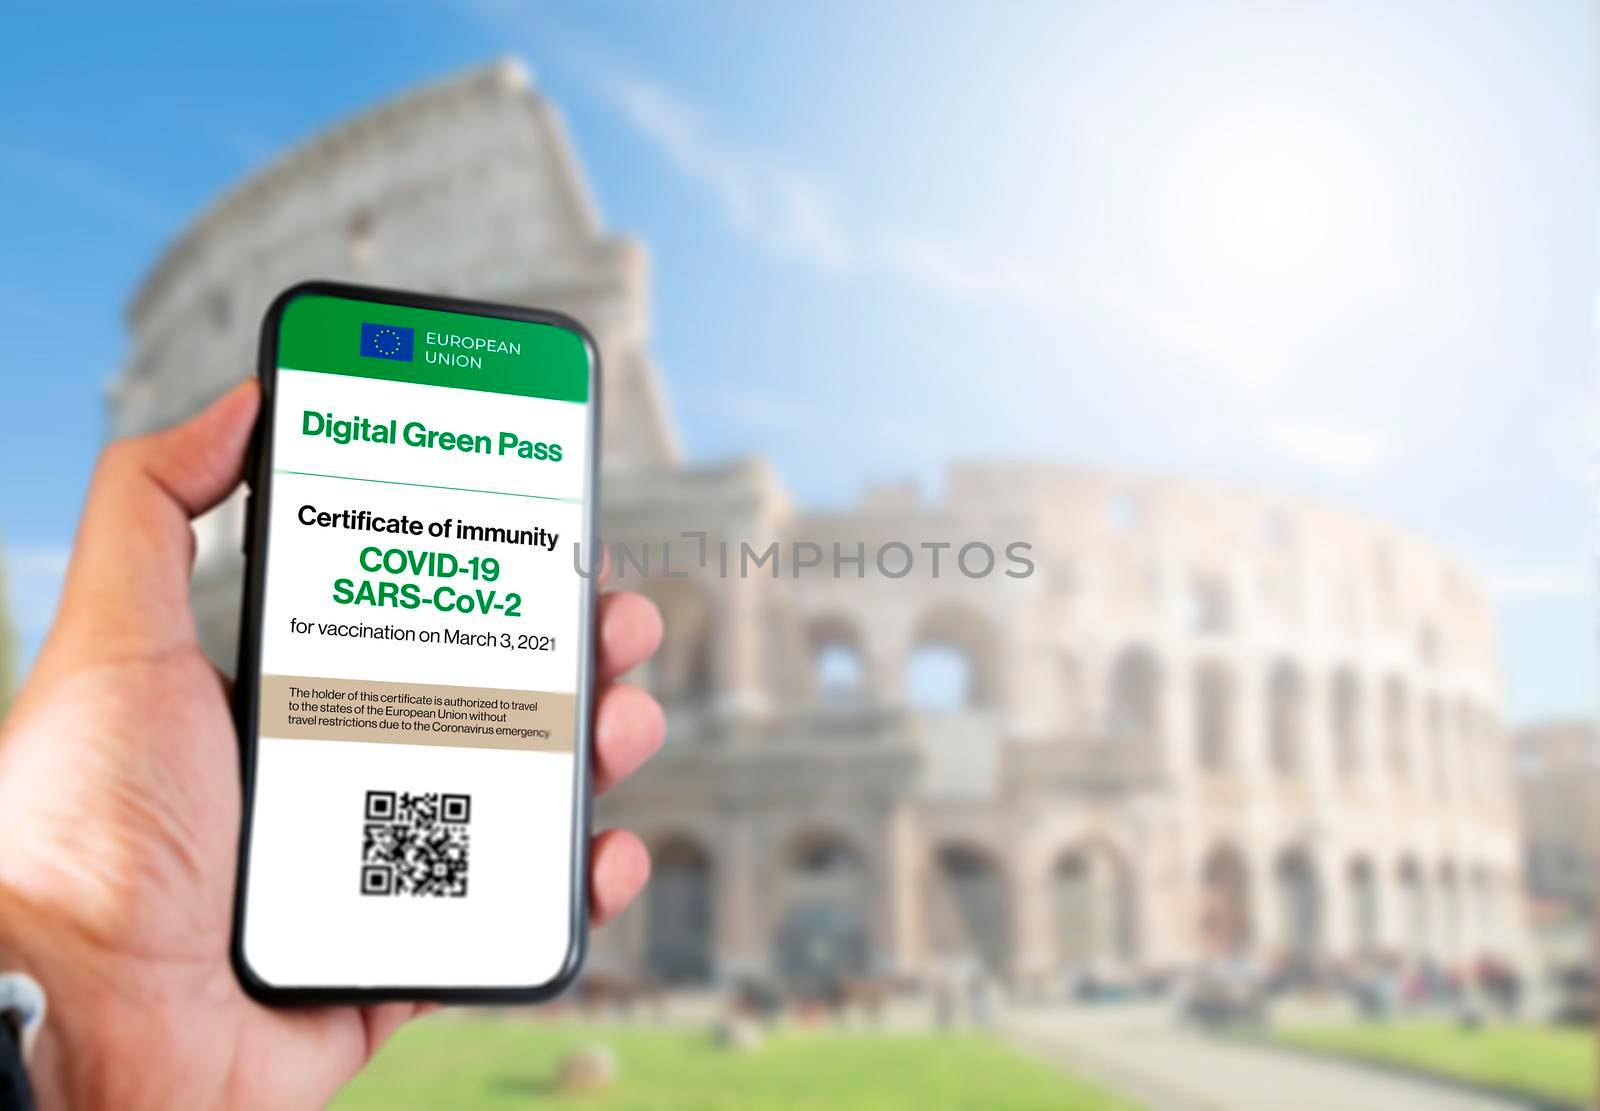 The digital green pass of the european union with the QR code on the screen of a mobile held by a hand with blurred colosseum in the background. Immunity from Covid-19. Travel without restrictions.